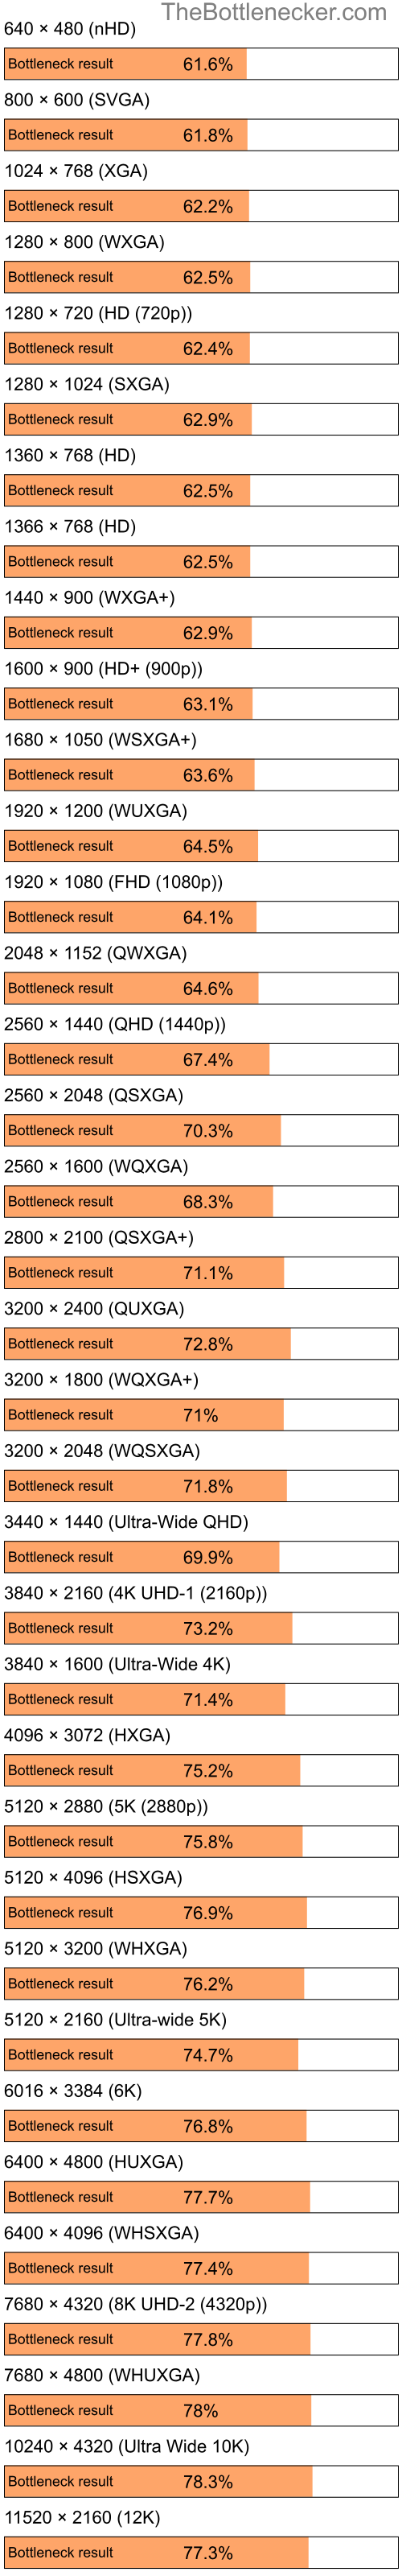 Bottleneck results by resolution for Intel Pentium 4 and AMD Mobility Radeon HD 3450 in7 Days to Die